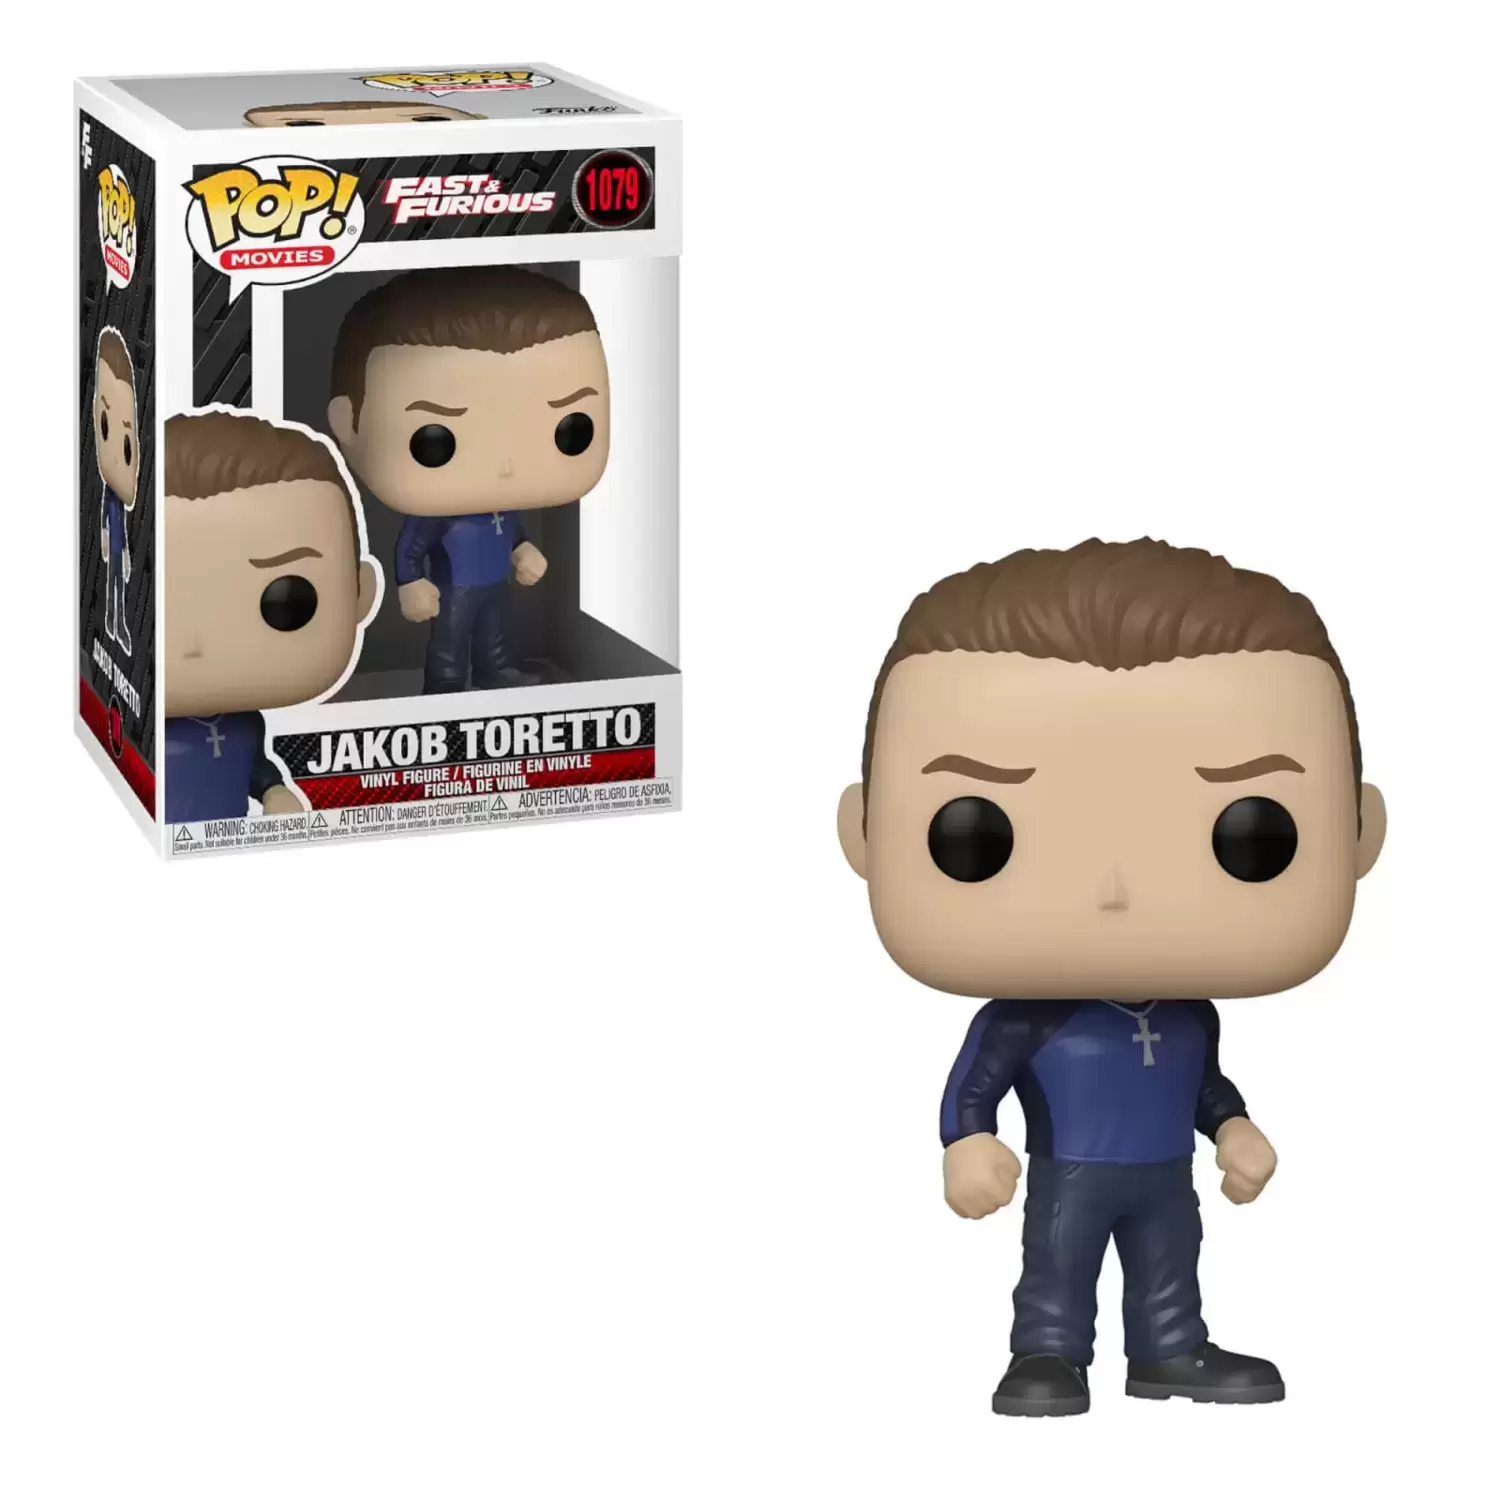 POP! Movies - Fast and Furious - Jakob Toretto